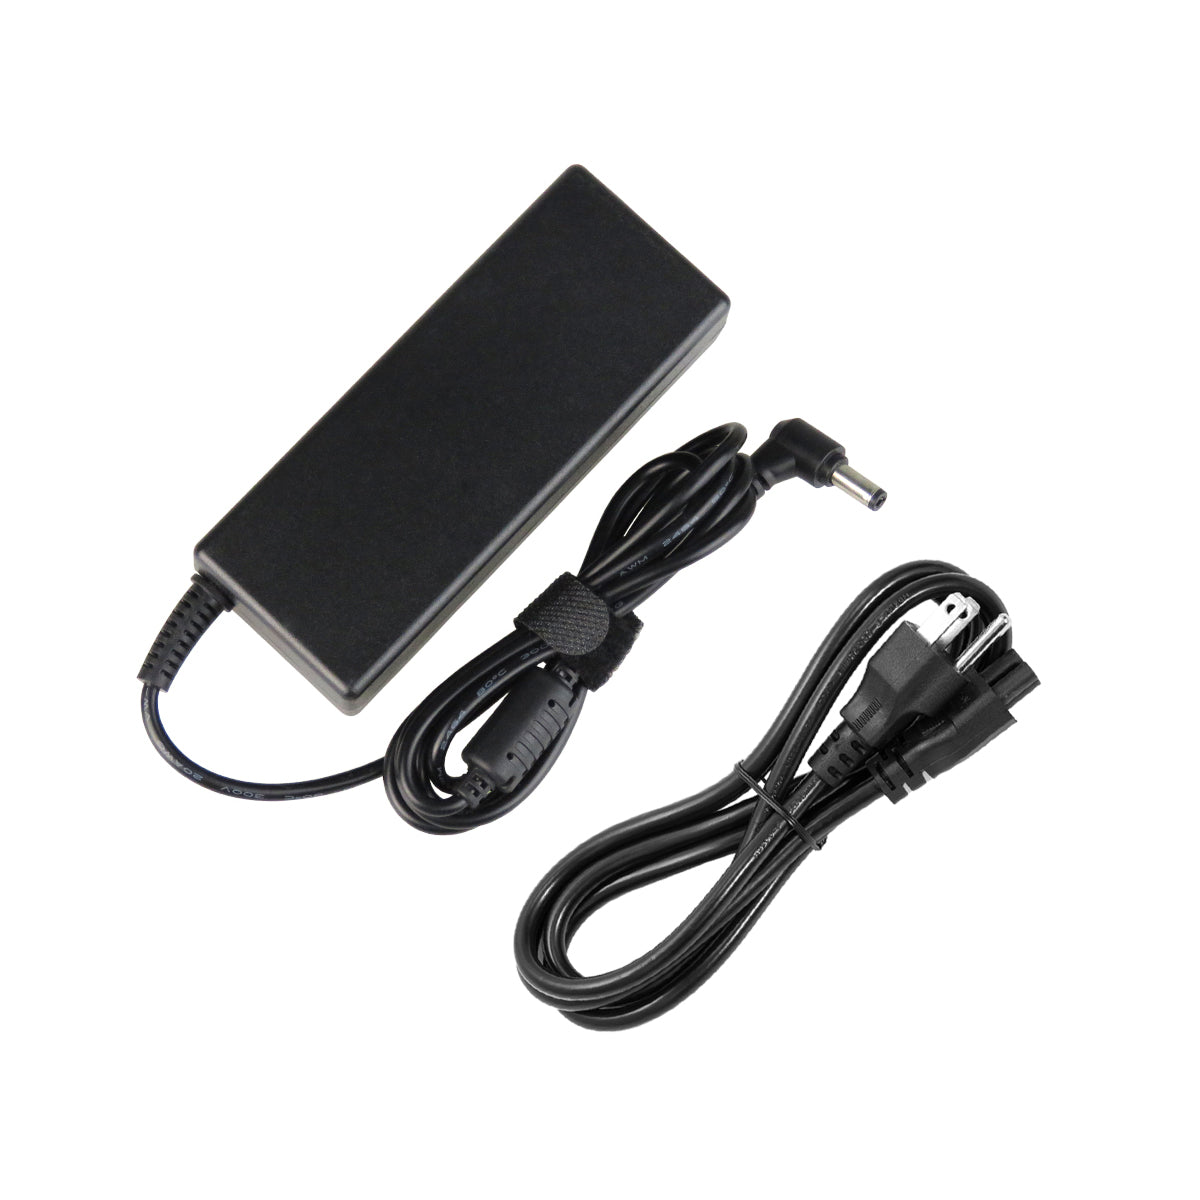 AC Adapter Charger for ASUS X54F Notebook.